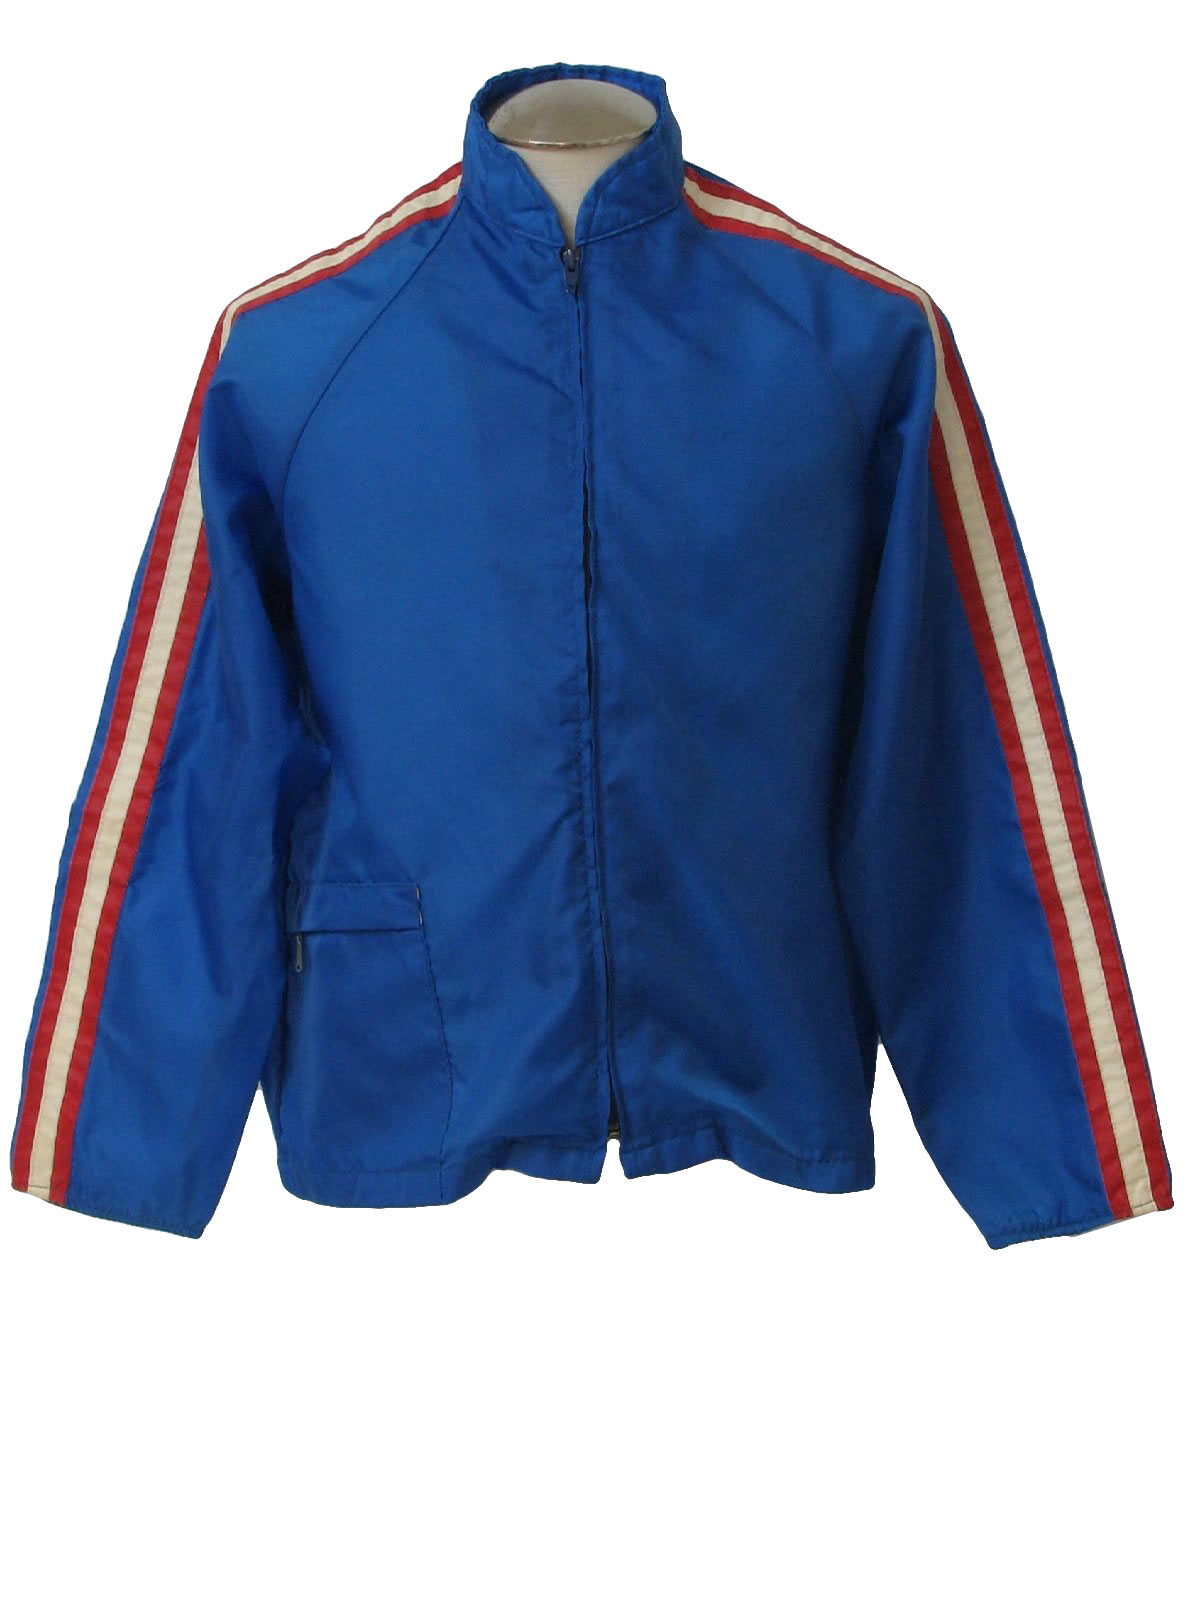 Seventies Worn Label Jacket: 70s -Worn Label- Mens blue, red and white ...